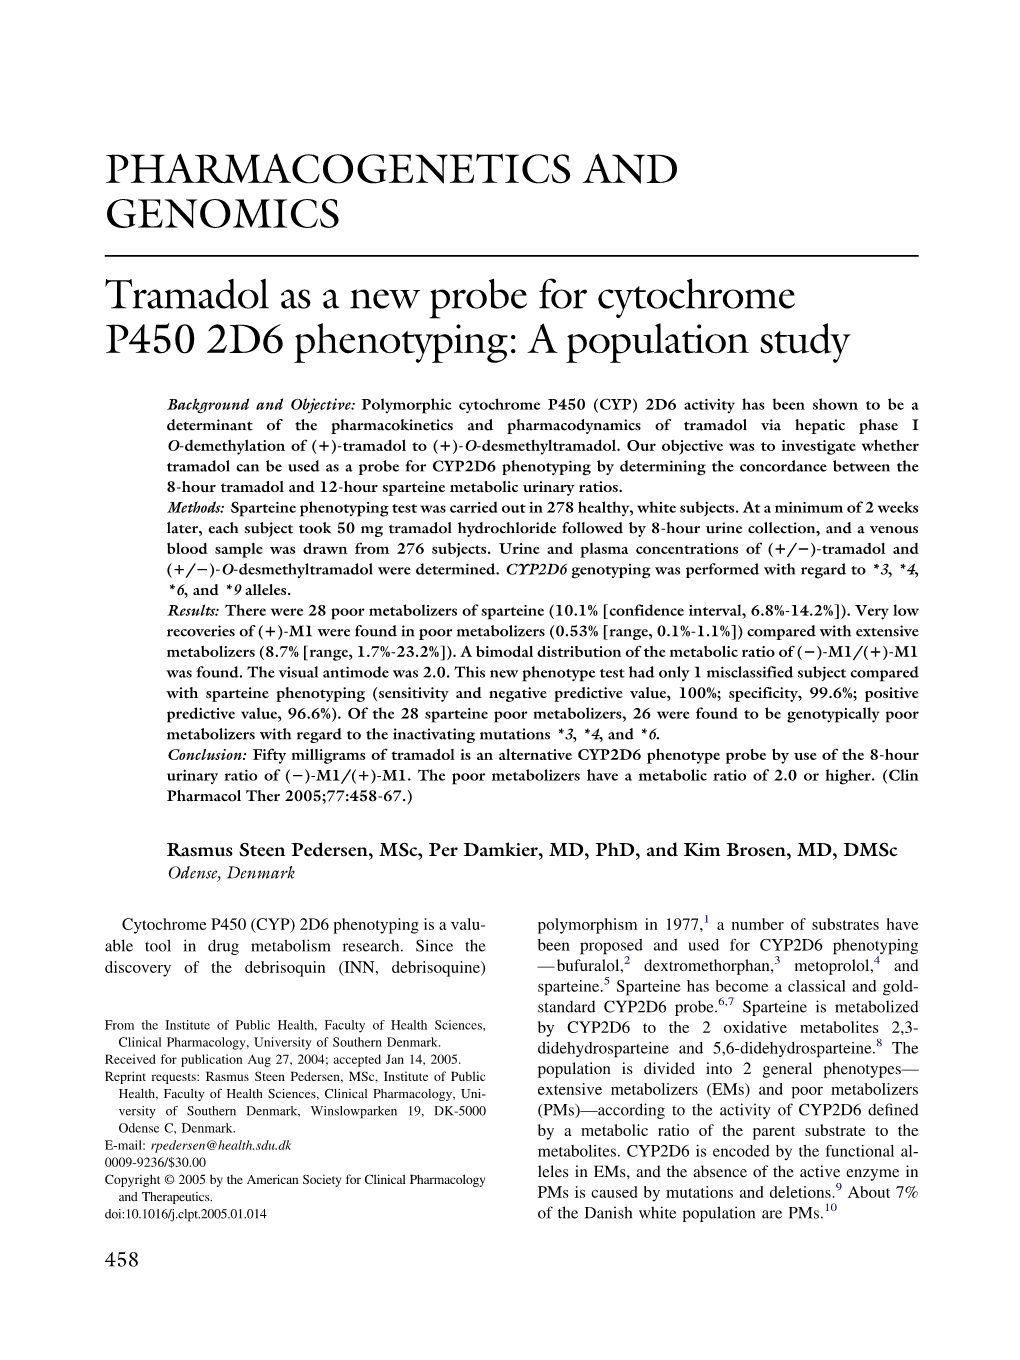 PHARMACOGENETICS and GENOMICS Tramadol As a New Probe for Cytochrome P450 2D6 Phenotyping: a Population Study